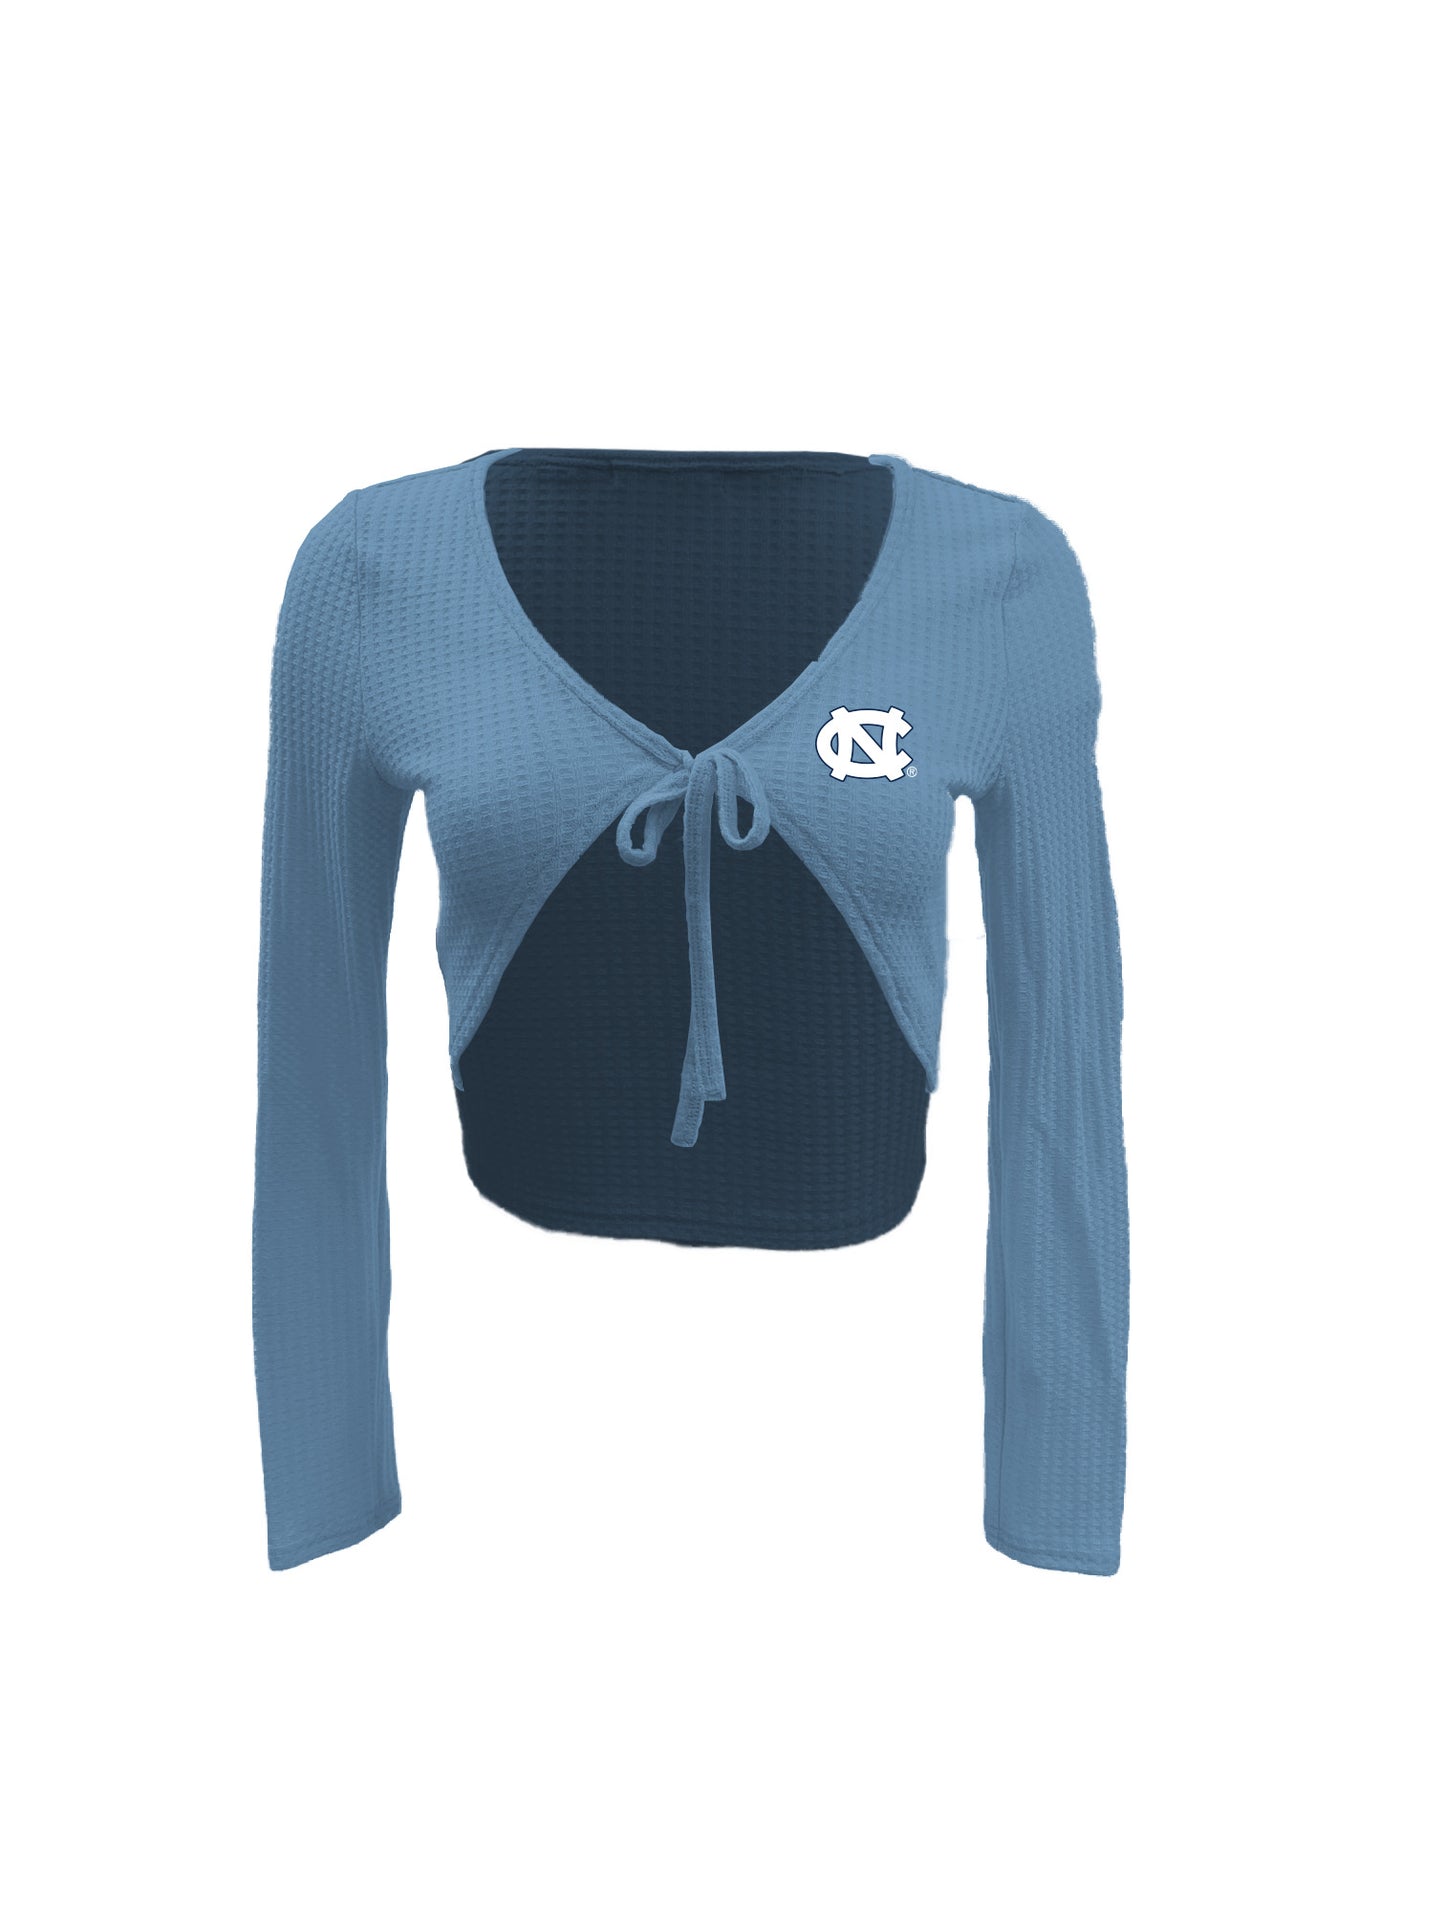 North Carolina Tar Heels Women's Wes and Willy Long Sleeve Tie Front Crop Top